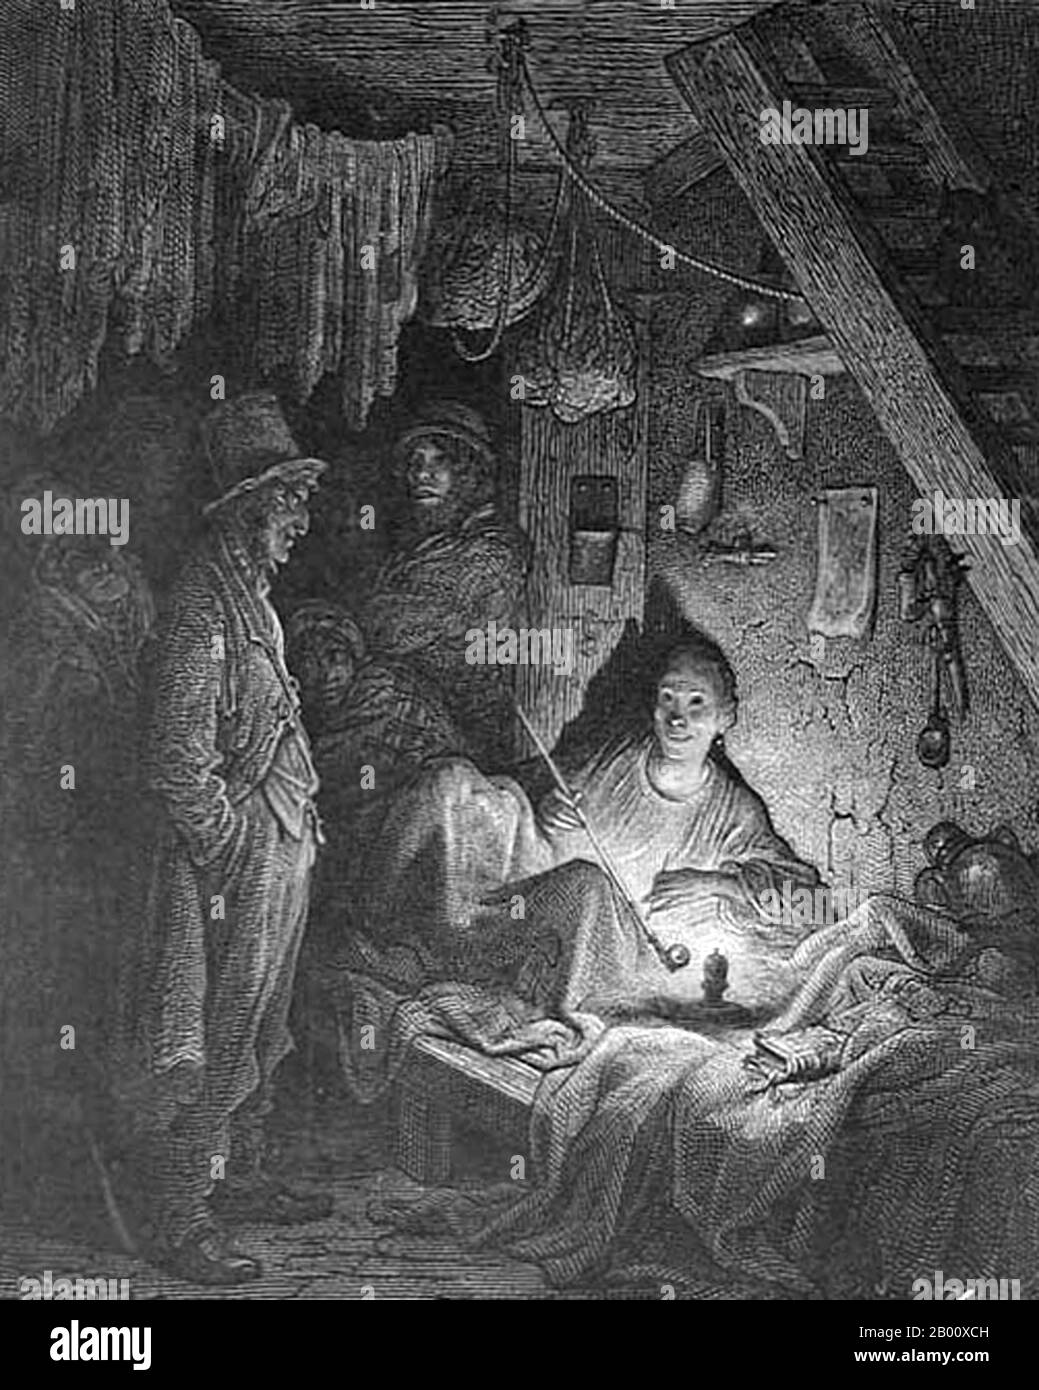 England/UK: 'Opium Smoking in the Lascar's Room', London. Engraving by Gustave Dore (1832-1883), 1873.  Engraved image titled: 'Opium Smoking - The Lascar's Room in Edwin Drood', from Harper's Weekly. A 'Lascar' was a sailor or militiaman from the Indian subcontinent or other countries east of the Cape of Good Hope, employed on European ships from the 16th century until the beginning of the 20th century. The word comes from the Persian Lashkar, meaning military camp or army, and al-askar, the Arabic word for a guard or soldier. Stock Photo